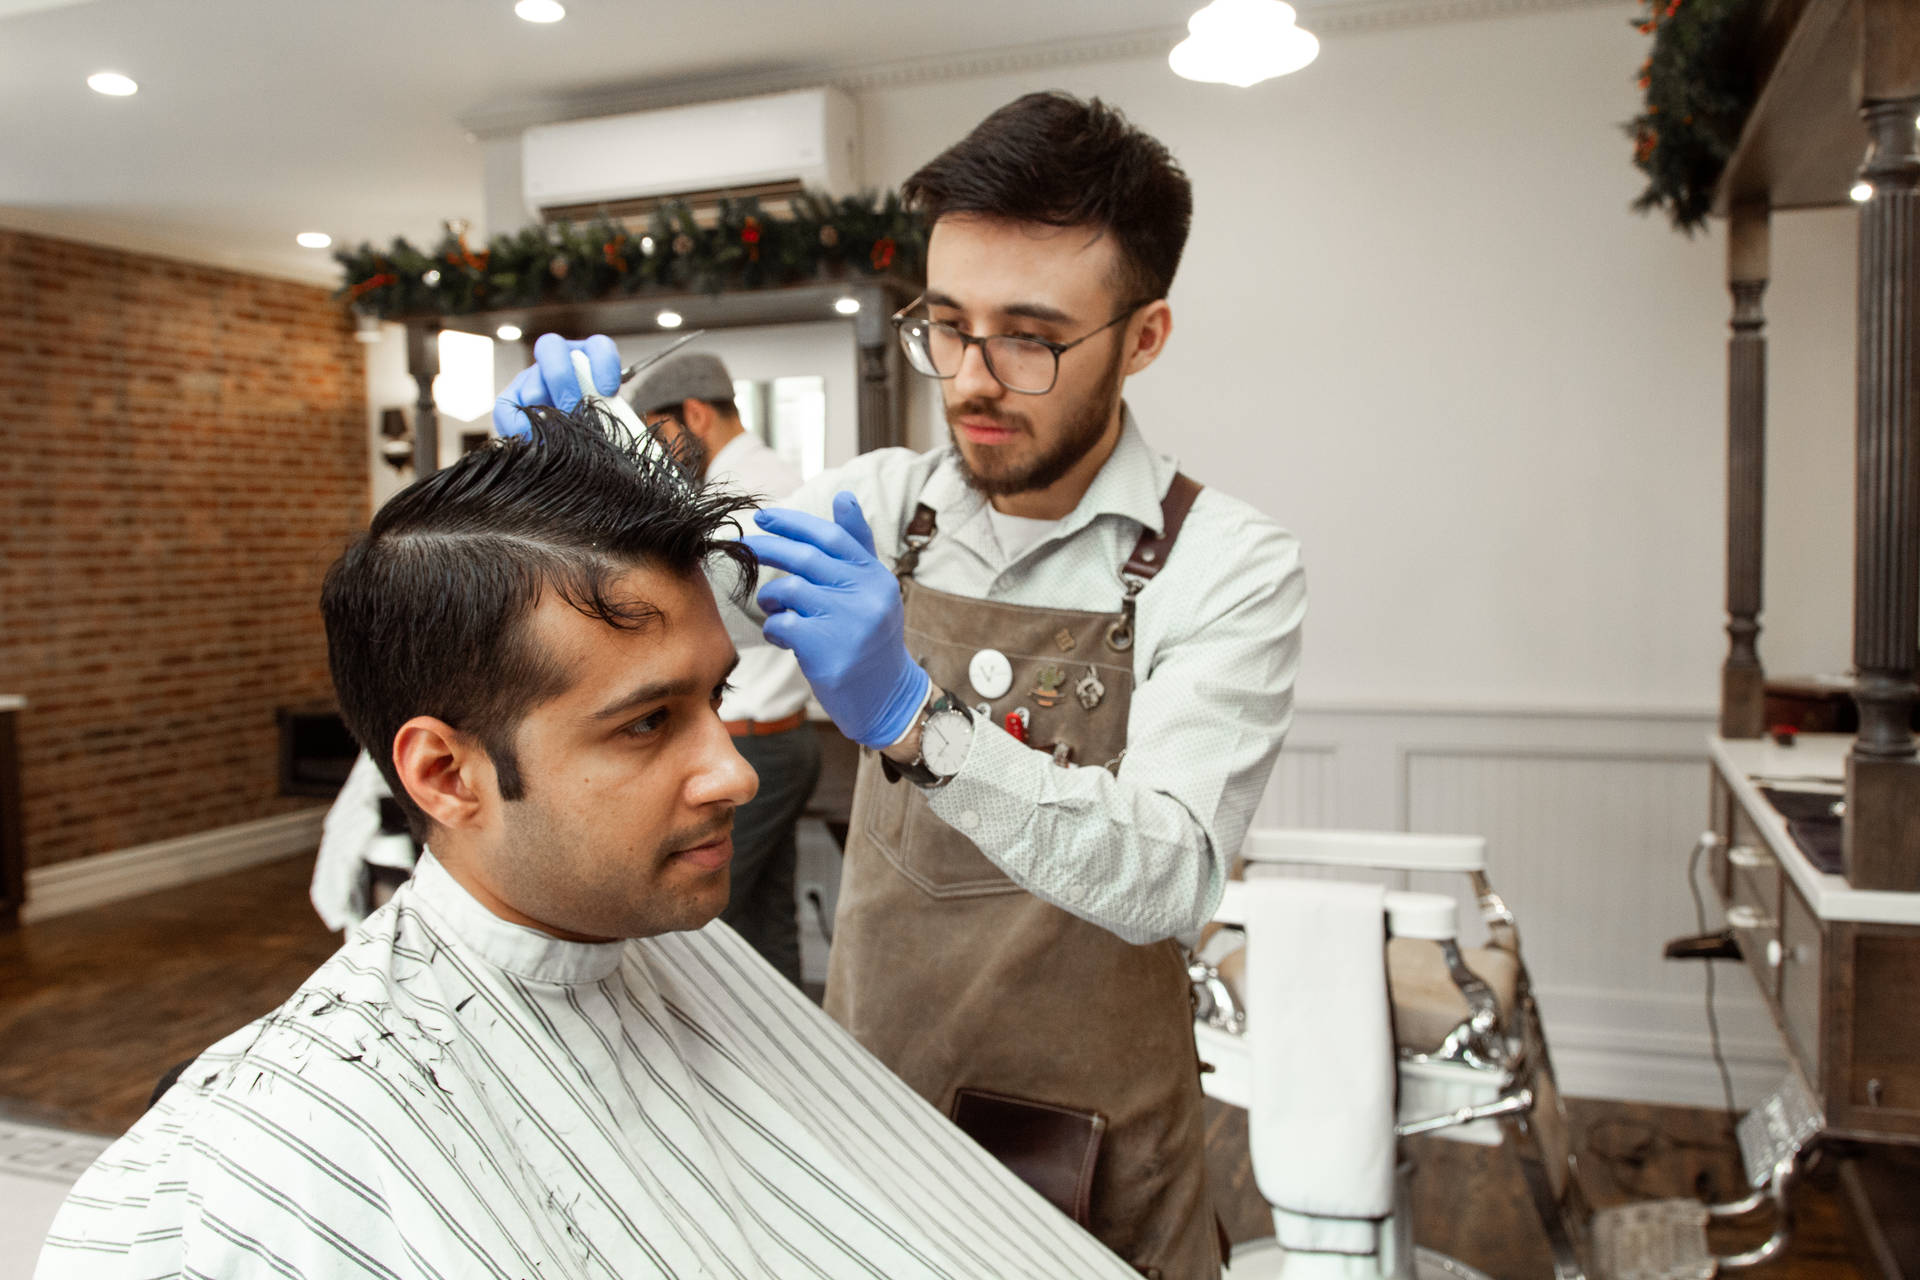 Hairdresser With Apron Performing Haircut Background